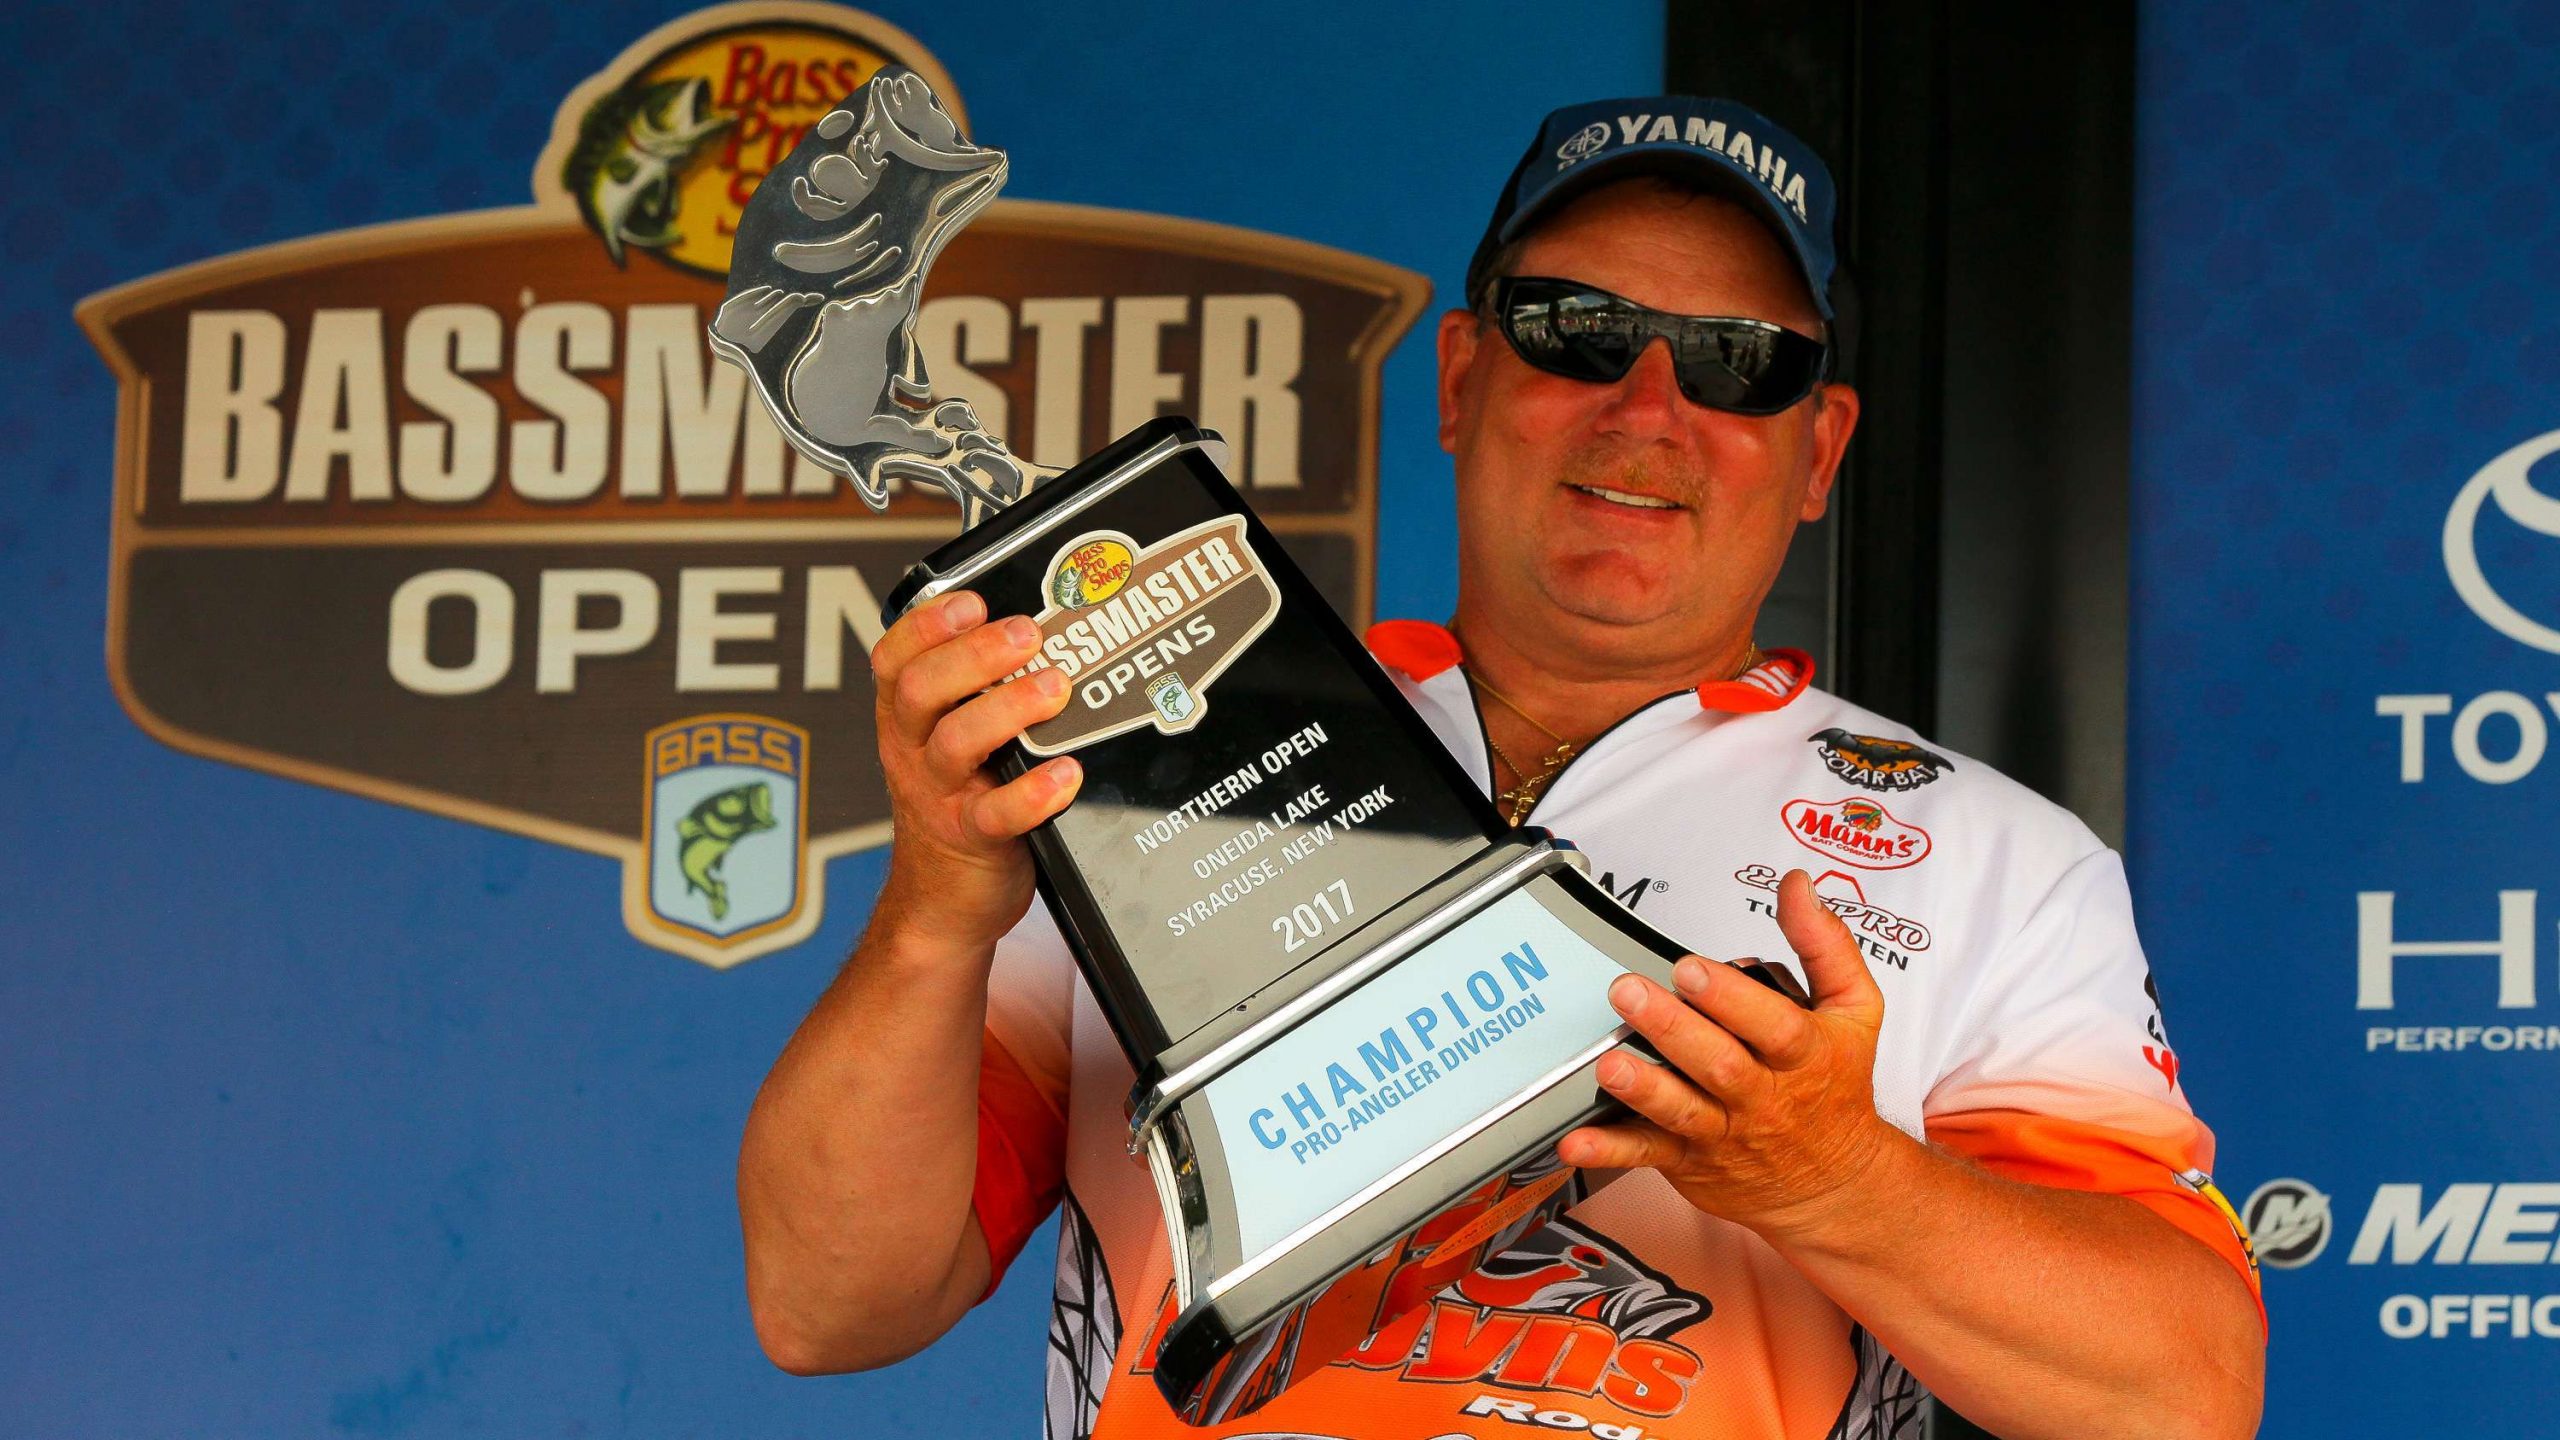 The pros and cos came to Oneida Lake for a Northern Open stop in 2017. Stanley Sypeck caught a bag of more than 20 pounds on Day 3 to bring home the trophy with a total of 55 pounds, 8 ounces.
